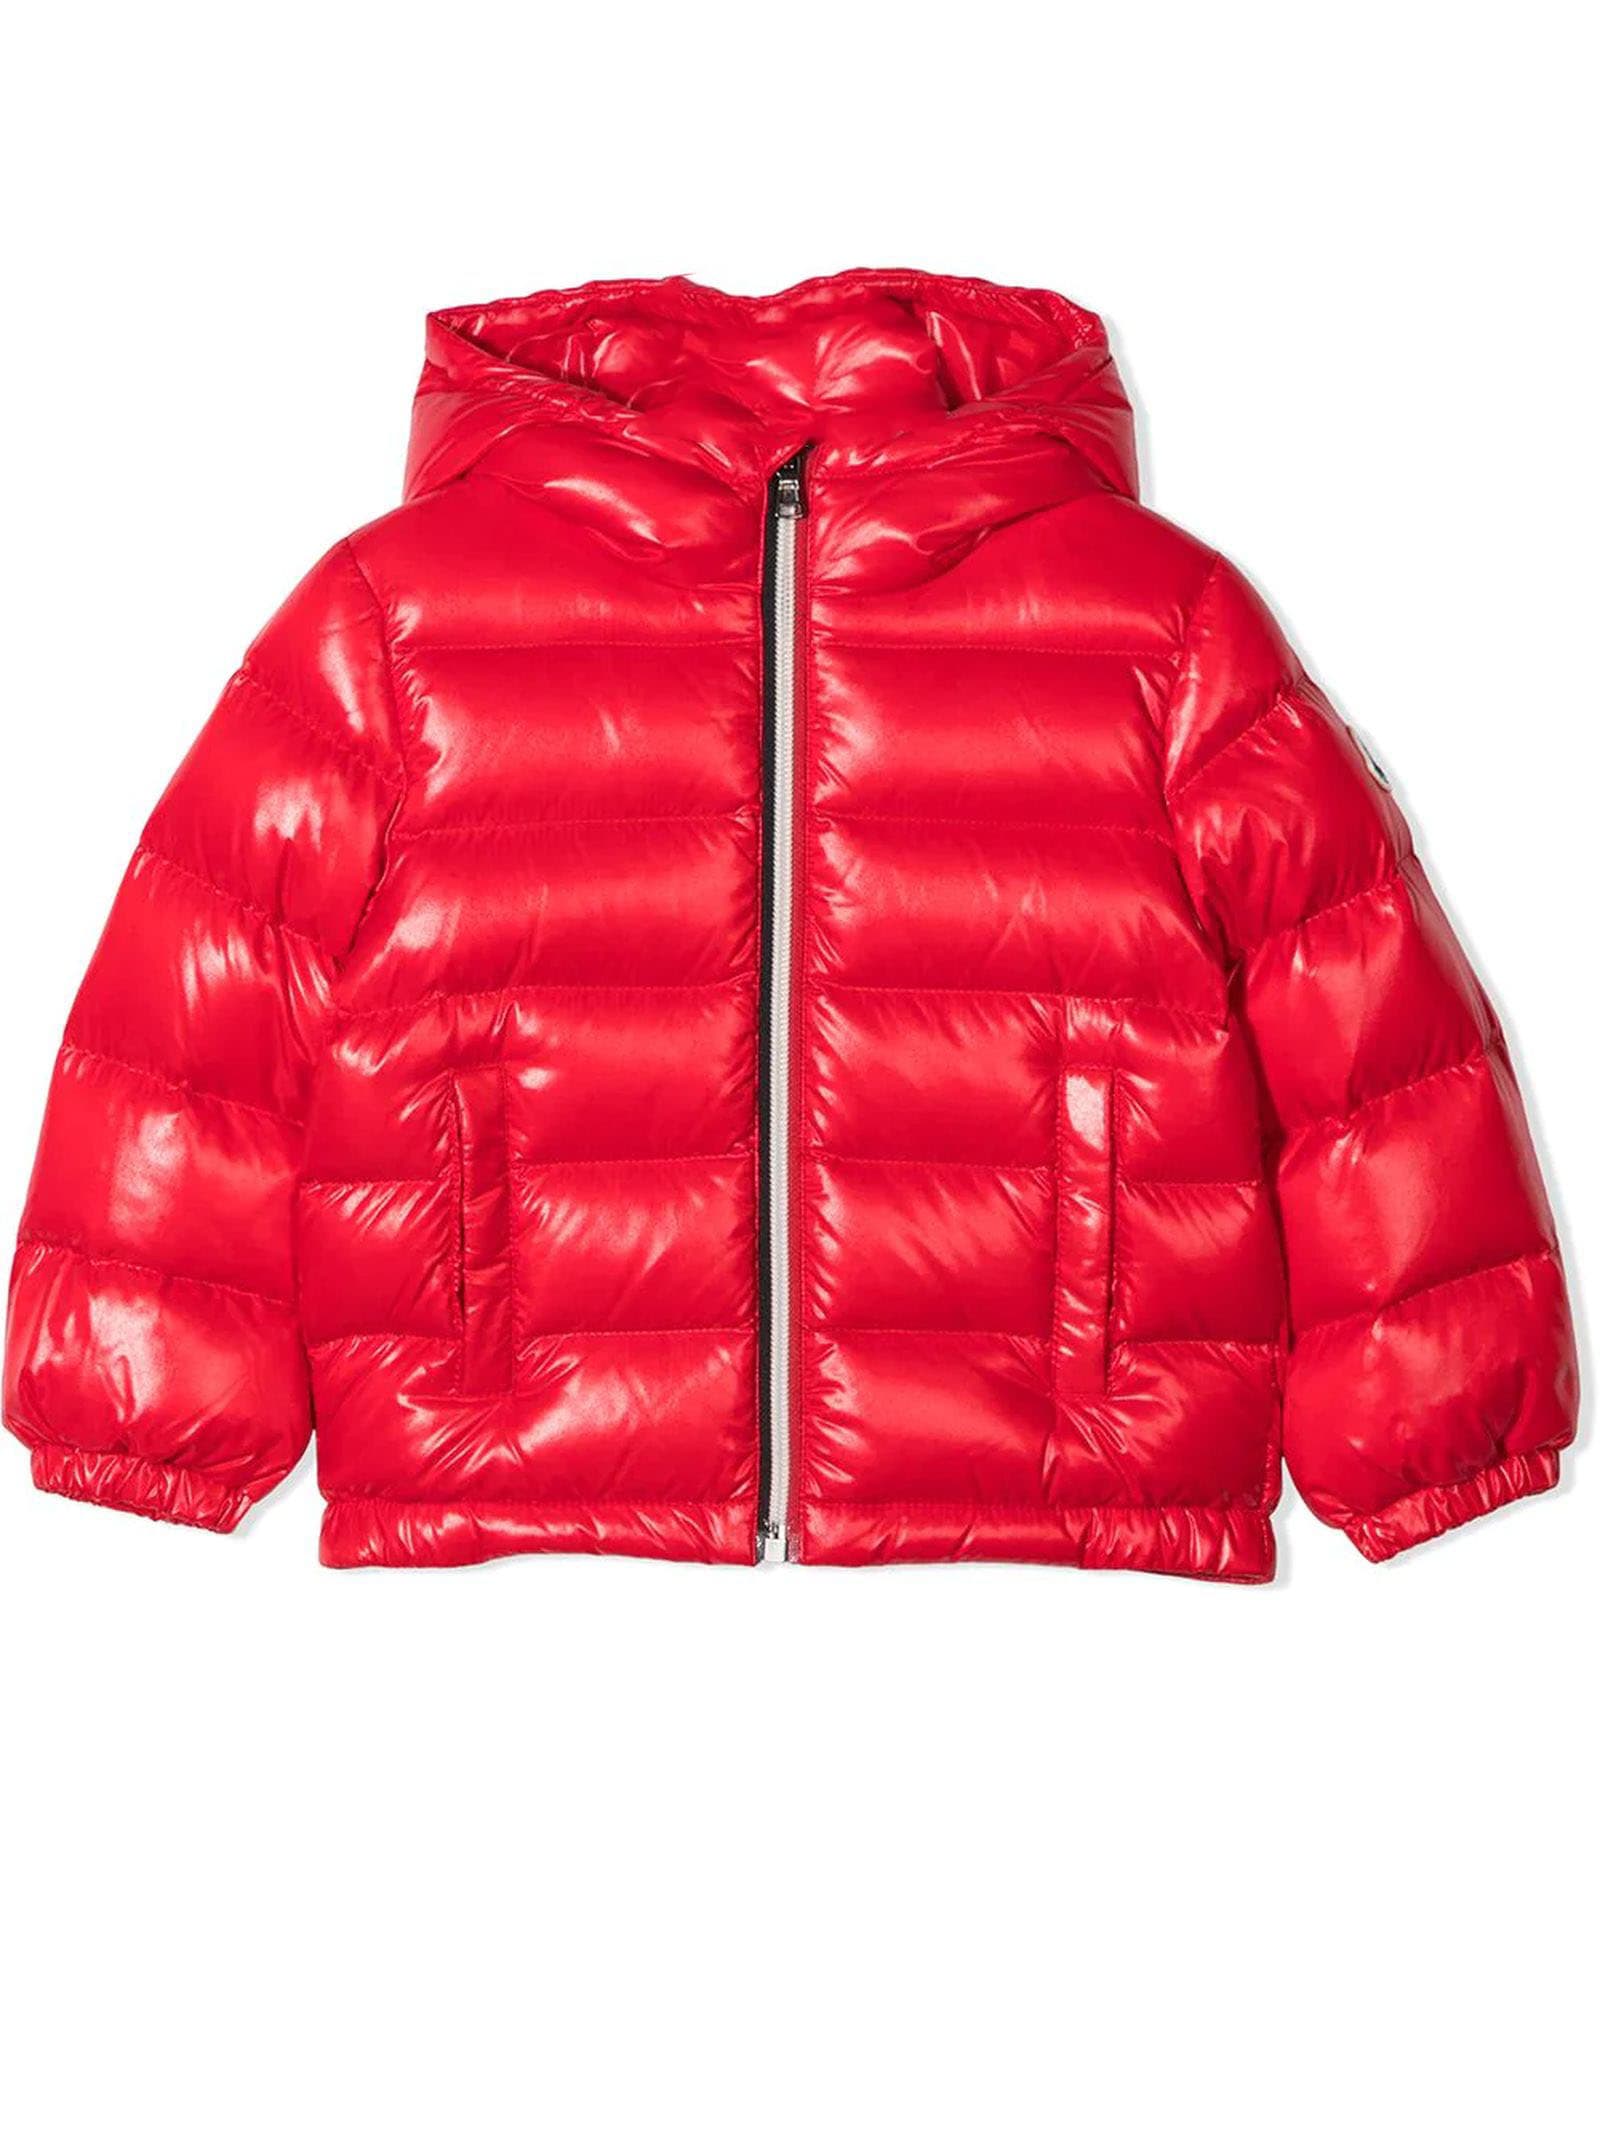 Moncler Cherry Red Puffer Jacket